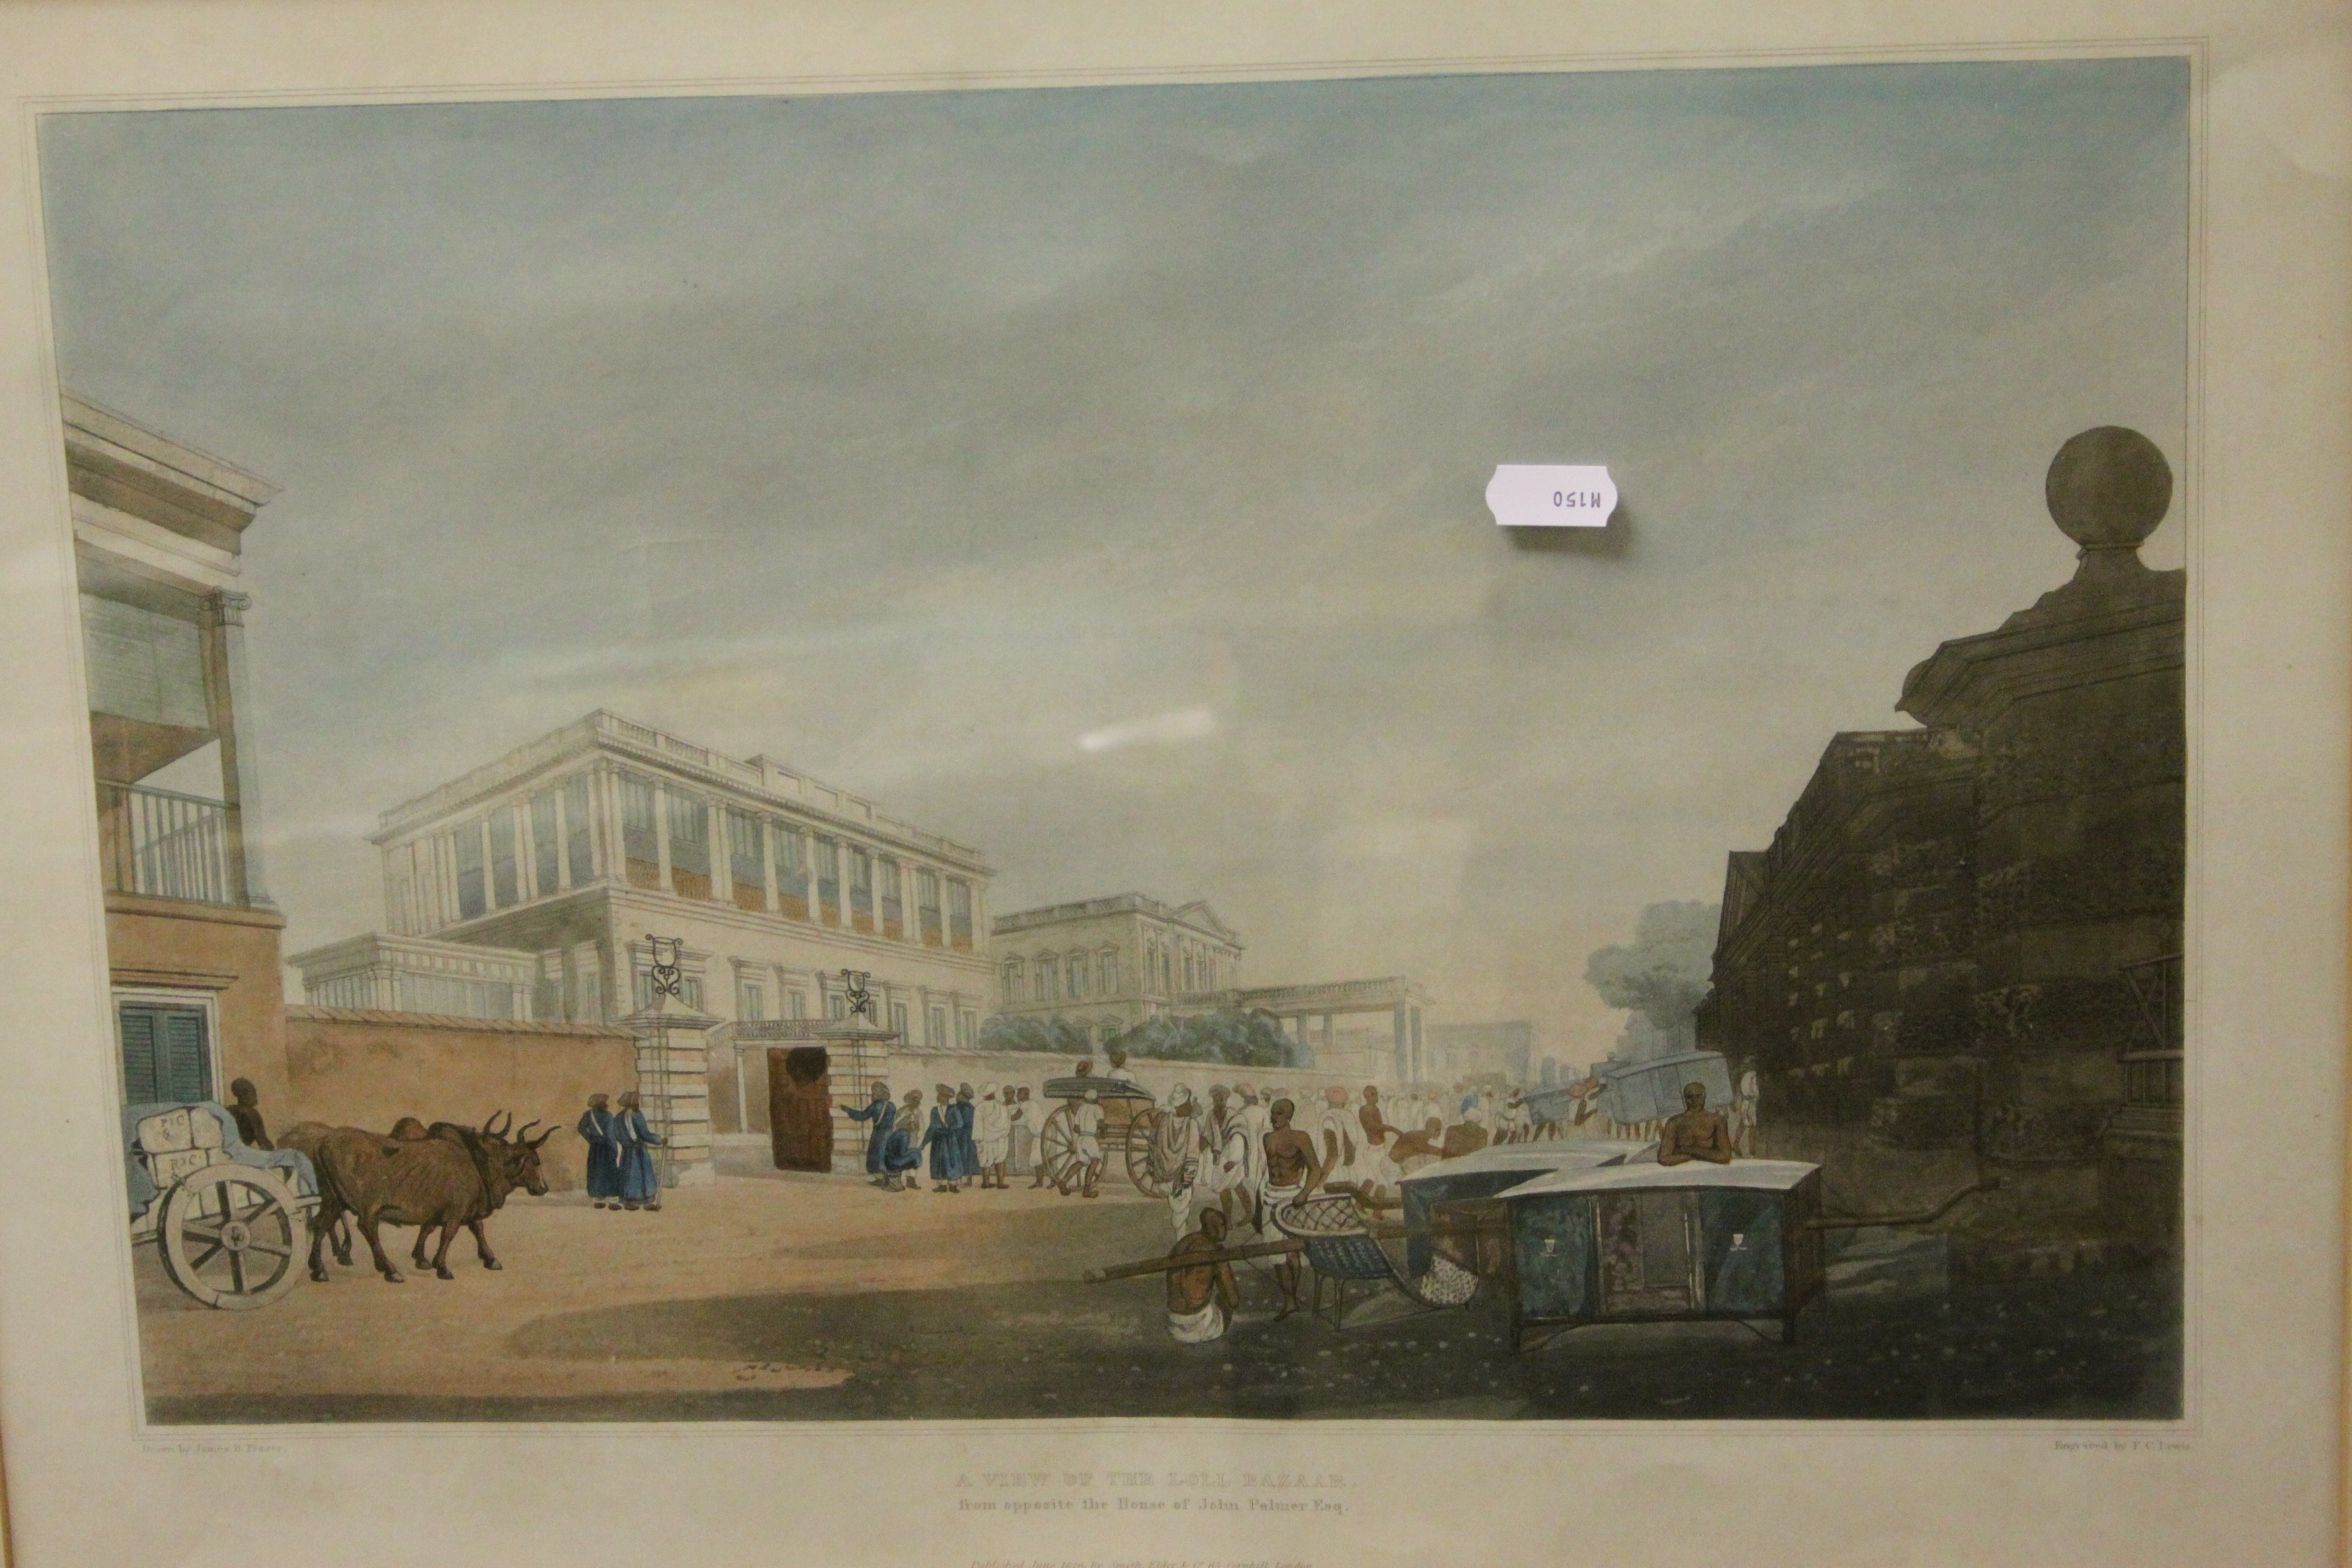 *James Bailey Fraser, aquatint published 1826 by Smith Elder, View of Loll Bazaar & aquatint by - Image 4 of 6